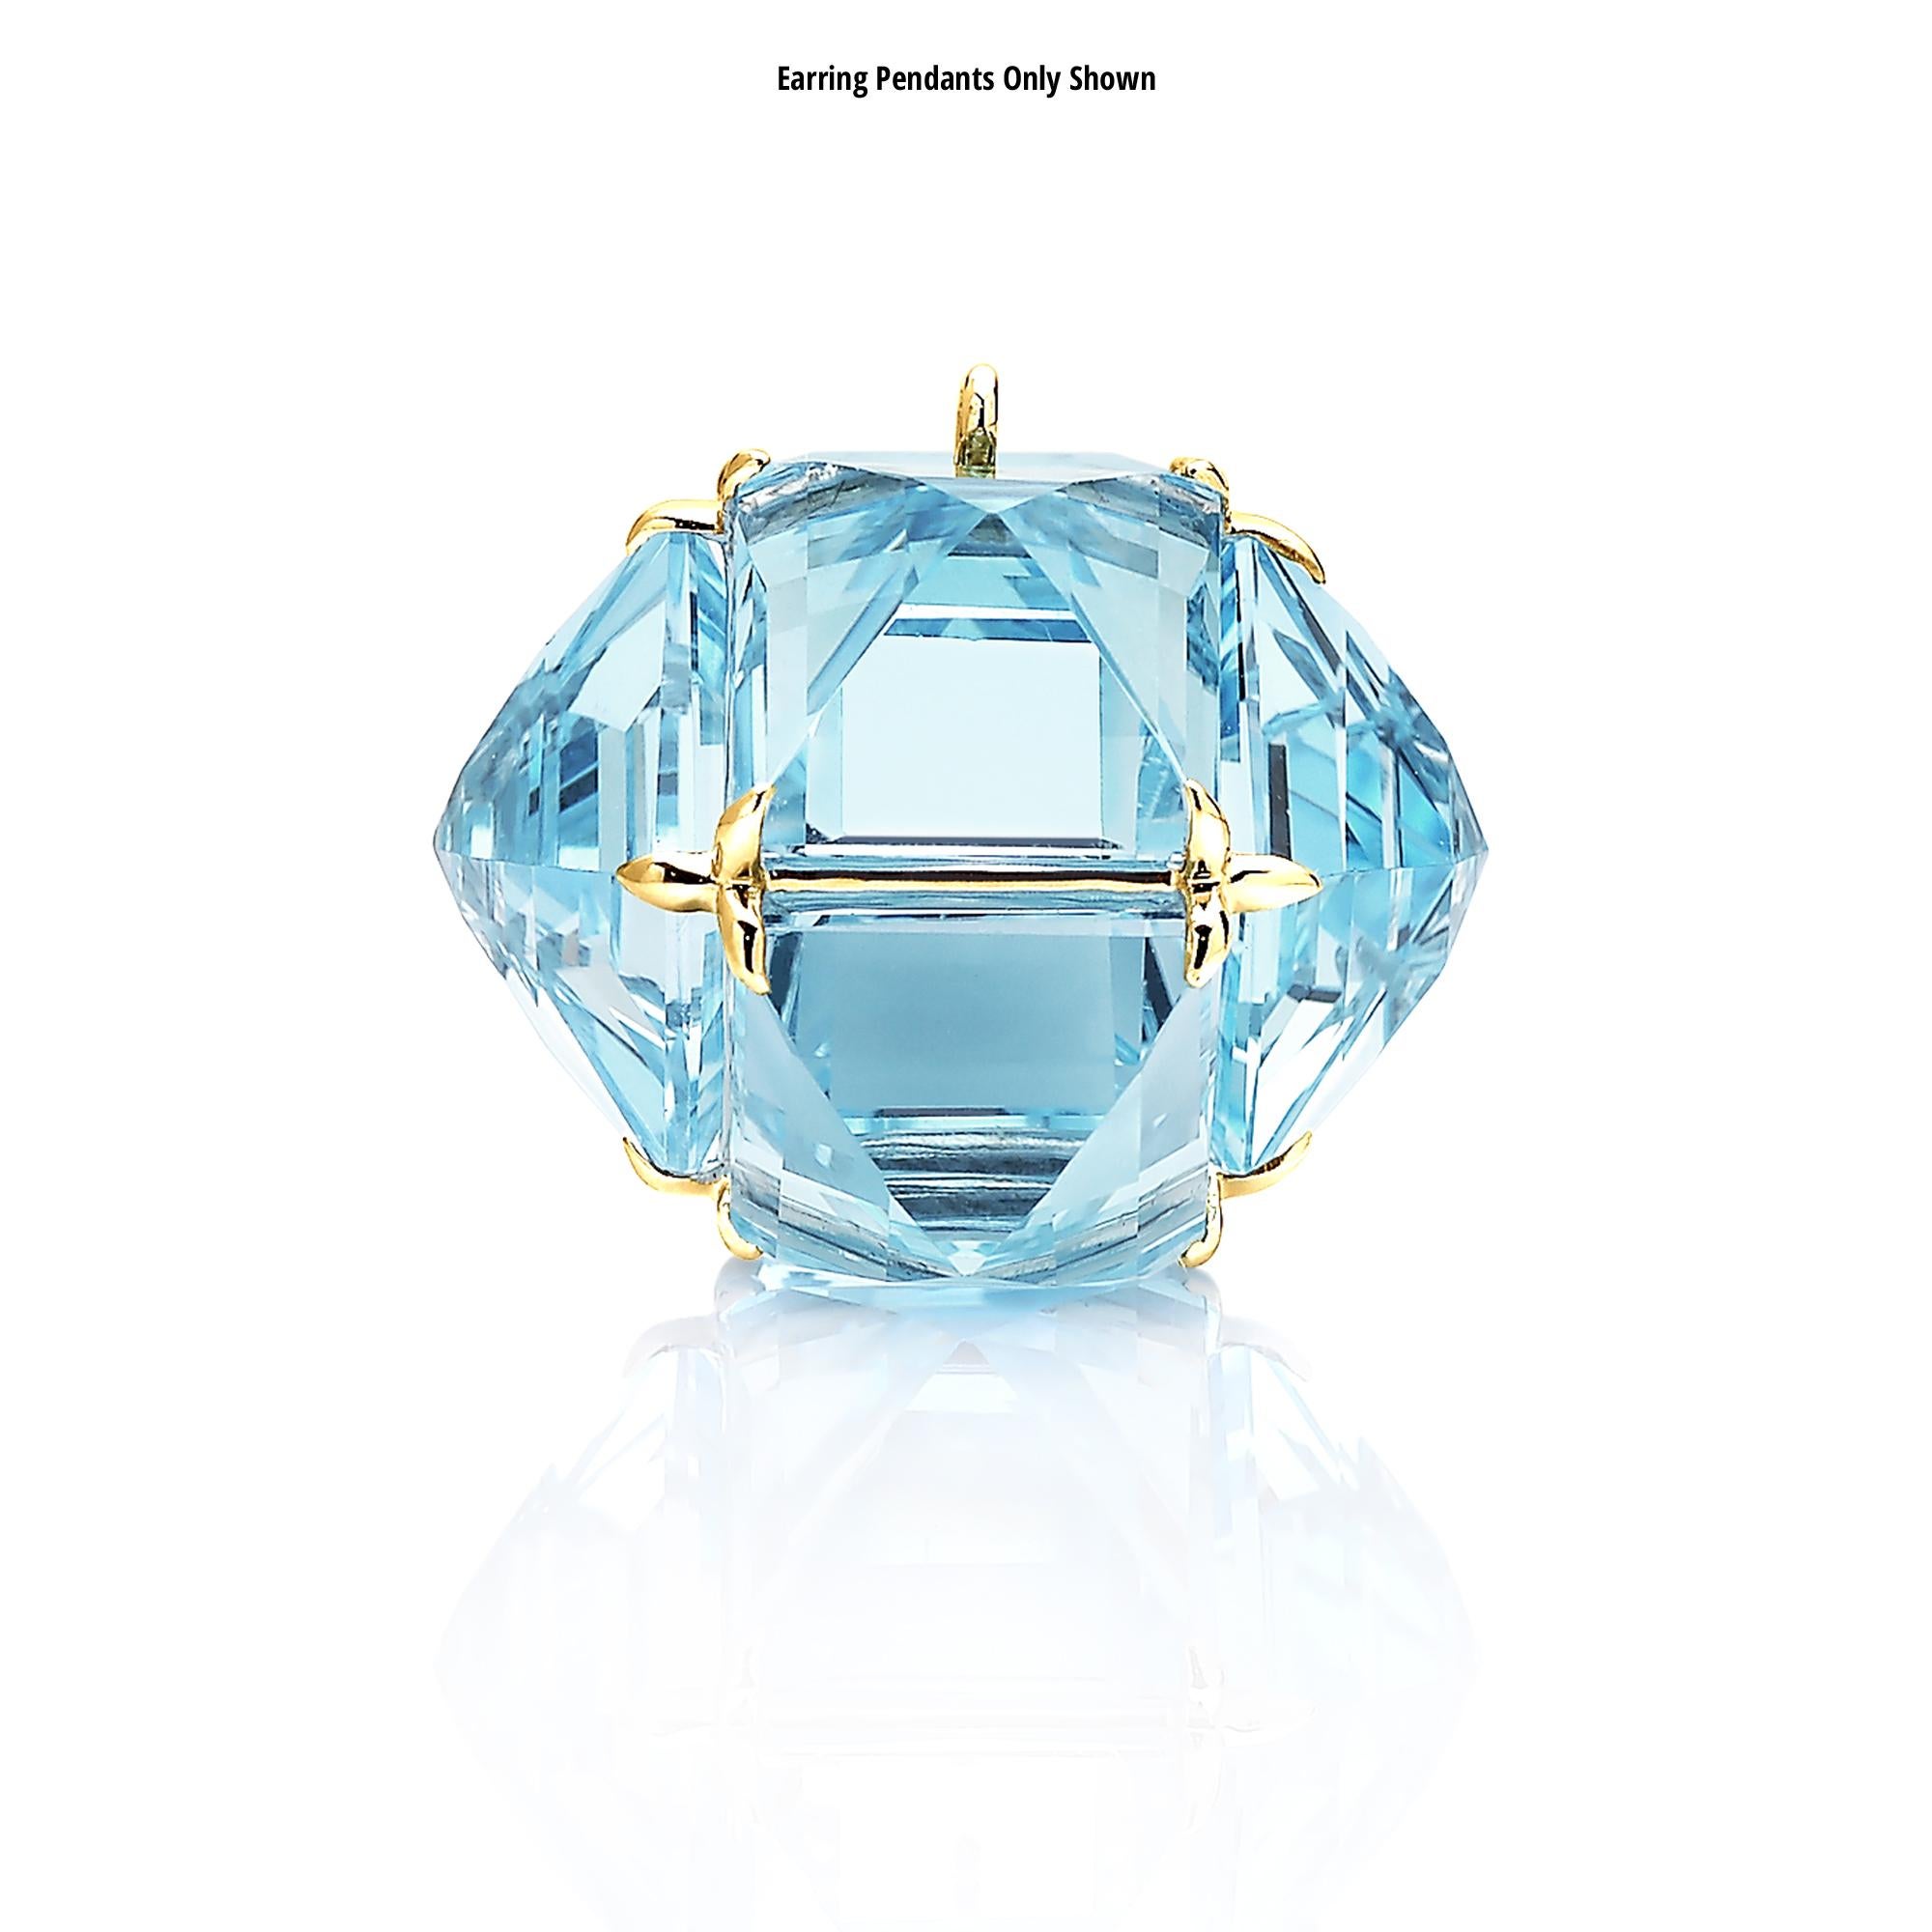 18 karat yellow gold Very PC® earrings with reverse set emerald-cut, sky blue topaz and diamond cut white sapphires.

Staying true to Paolo Costagli’s appreciation for modern and clean geometries, the Very PC® collection embodies bold angles of